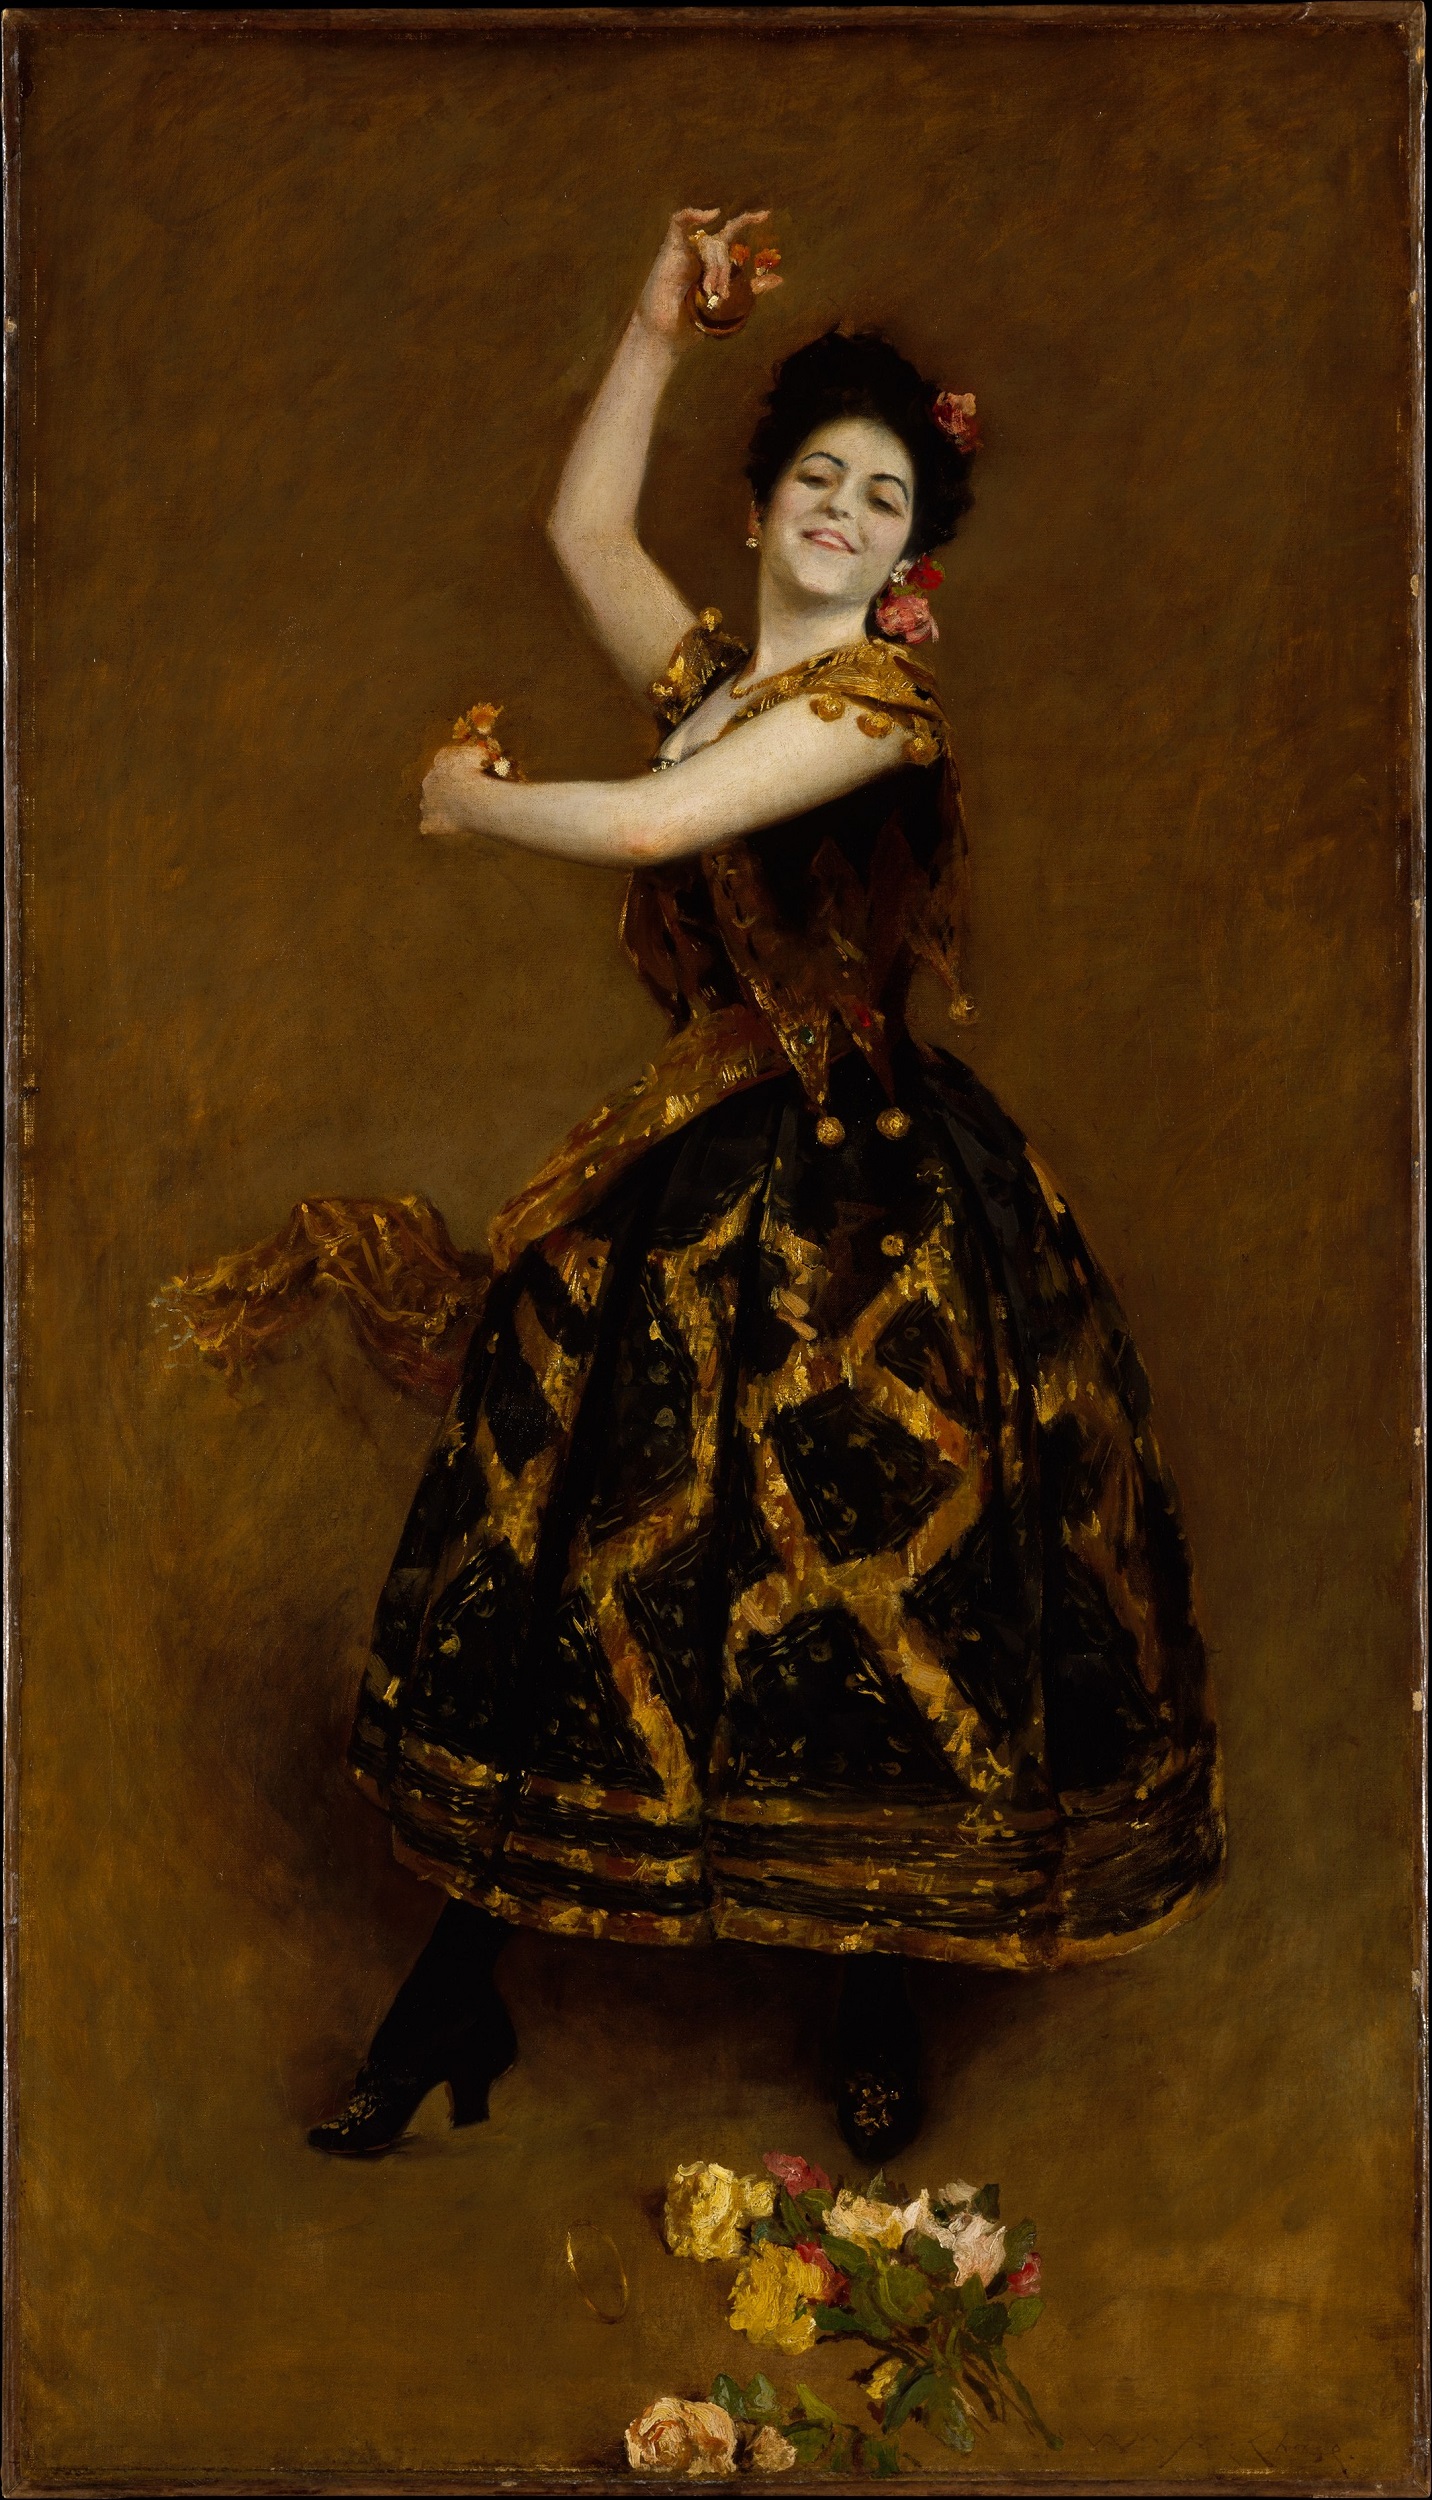 Oil painting of a dark-haired woman in an ornate dress dancing, with castanets in her fingers.